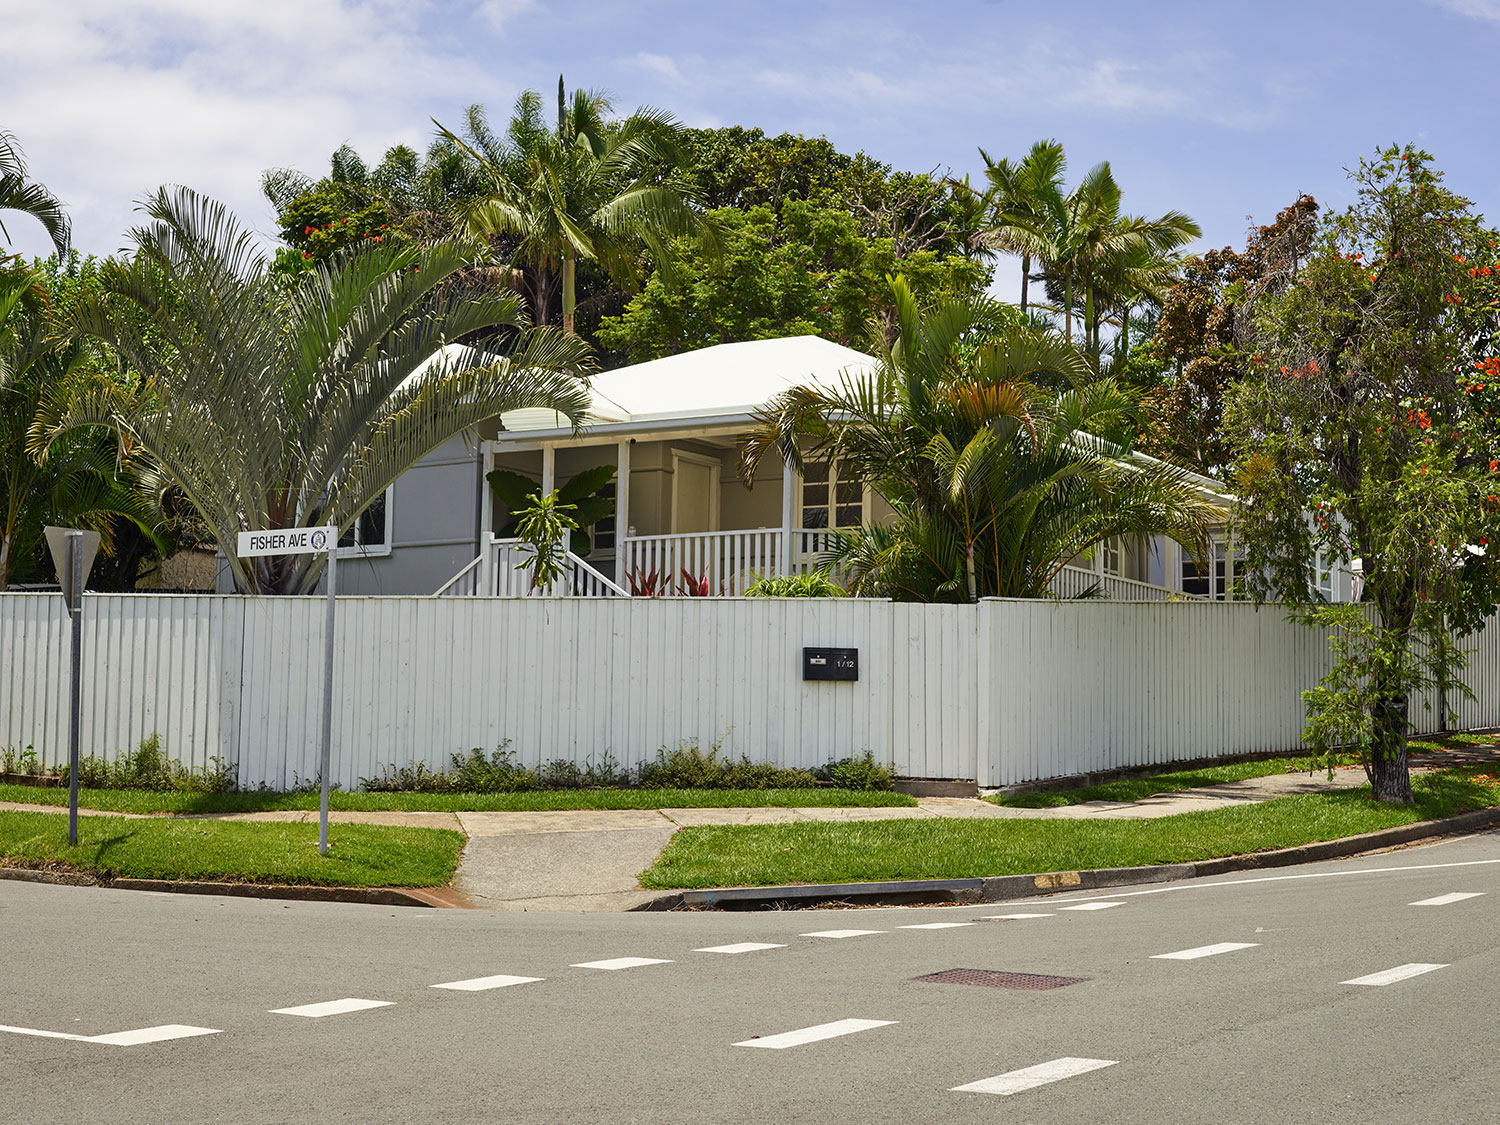 A collection of old Queenslanders and heritage homes add to the charm of the quieter Southport backstreets.